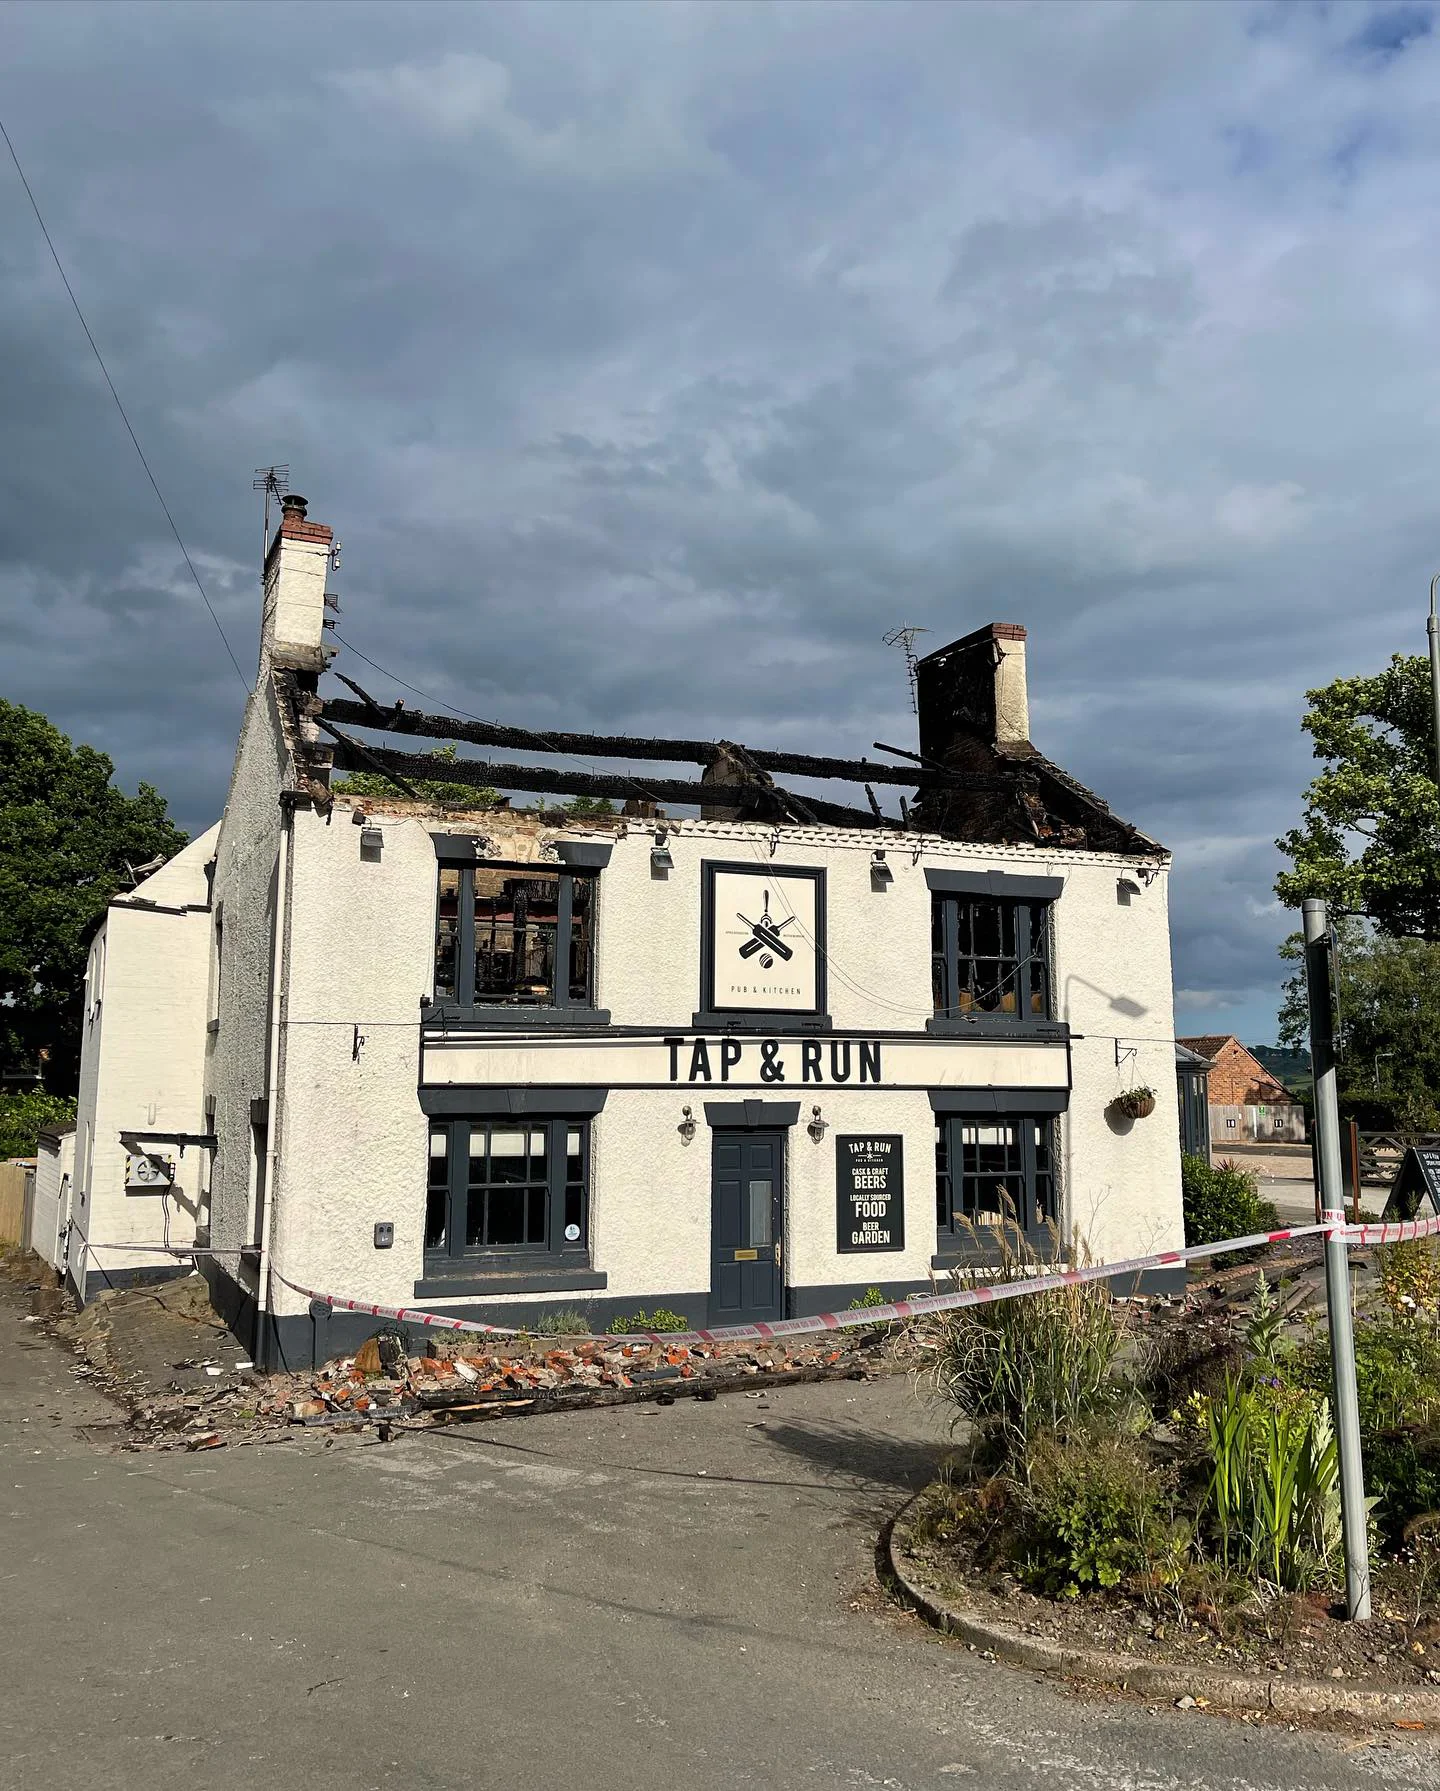 Tap and Run pub from the outside showing the fire  and serious damage to the roof